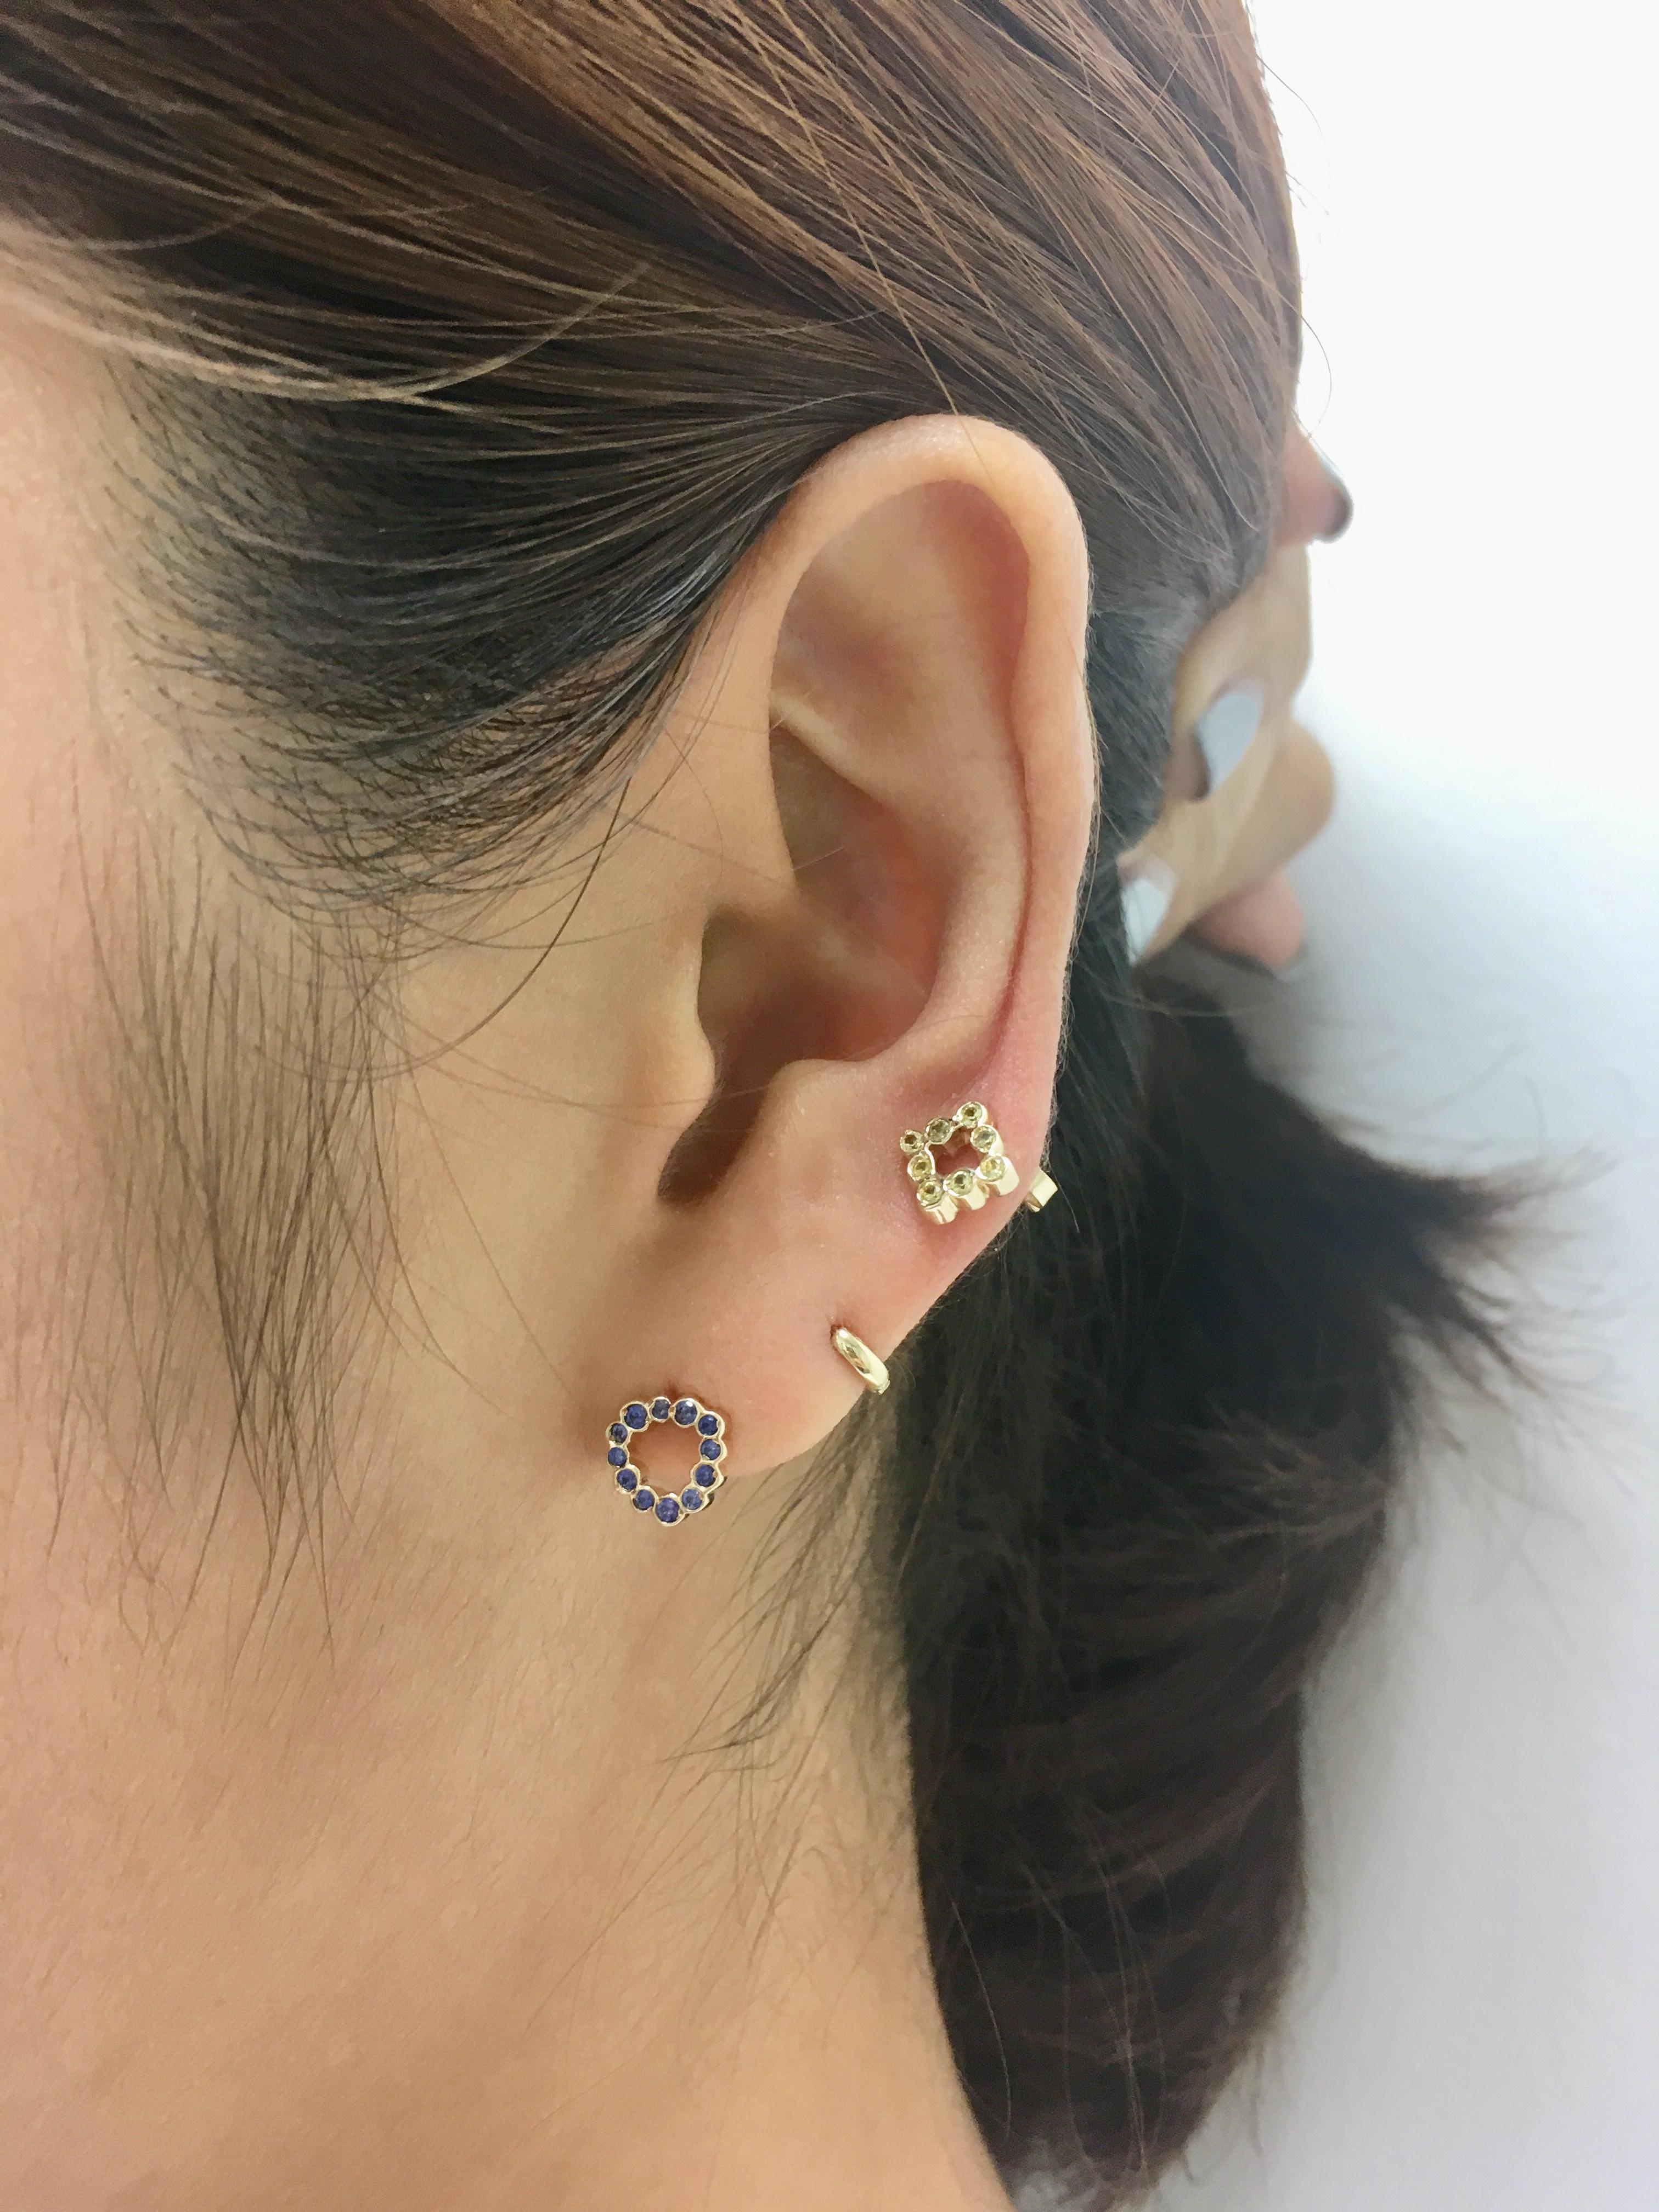 Wear these miniature diamond shape stud earrings with Yellow Sapphires for a punch
of color on your ears. Mix and match with your favorite single earrings or wear them as a pair.

Inspired by seeing the cross-section view of life, as if slicing a